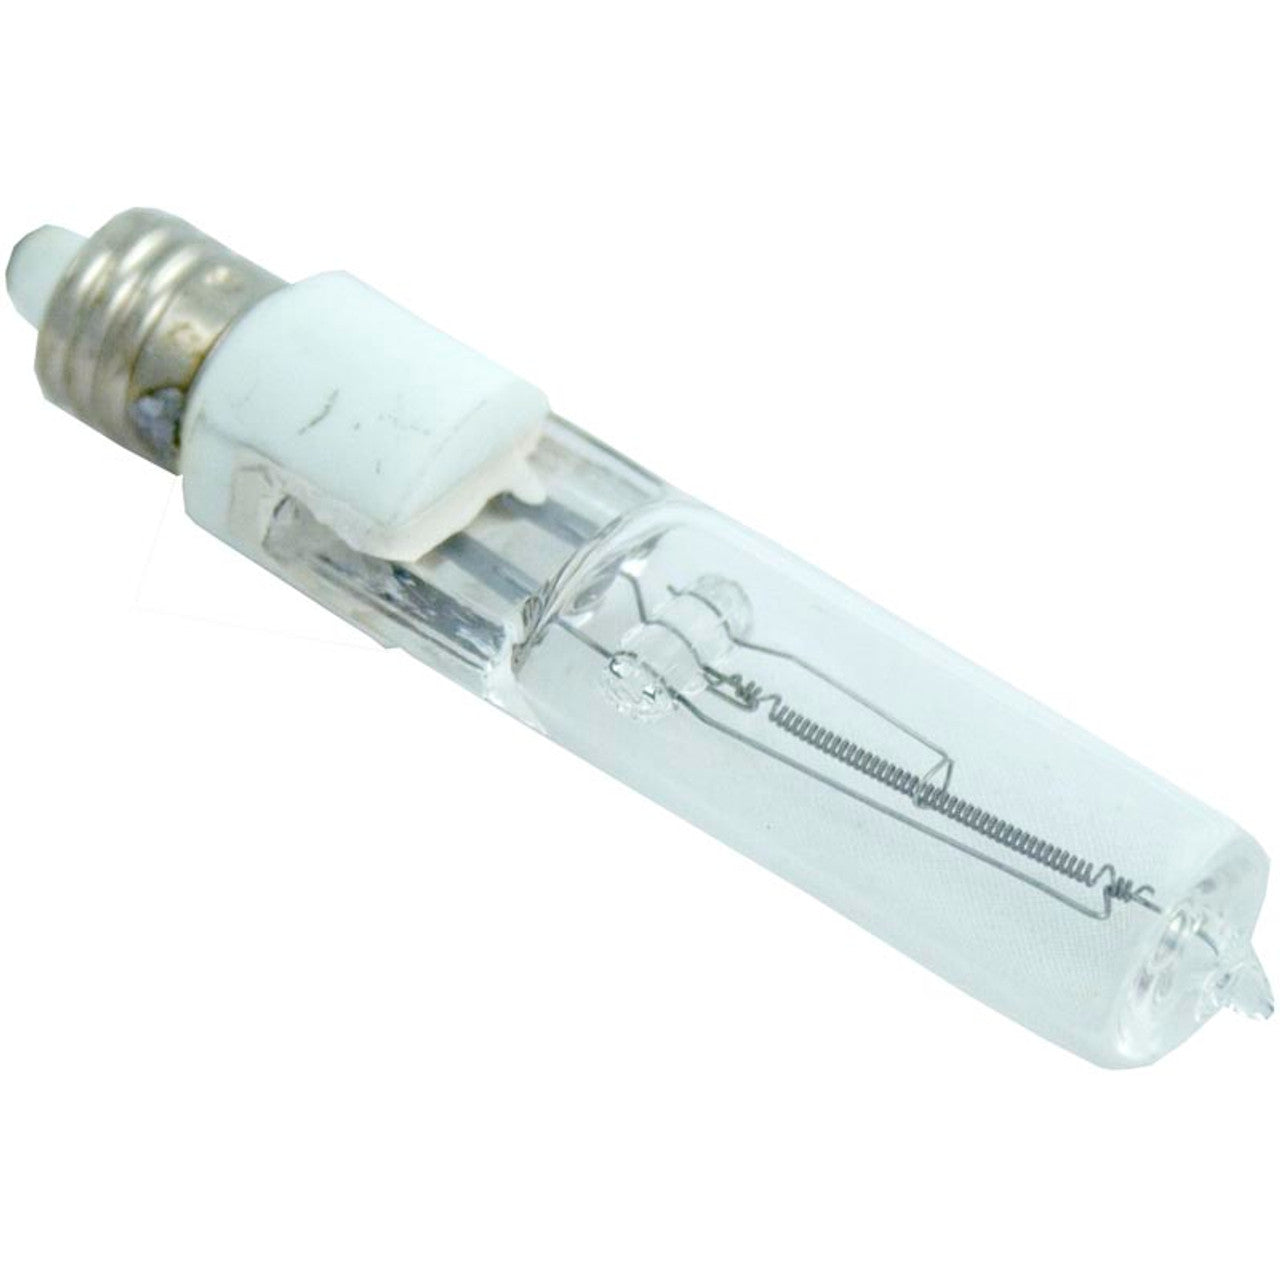 Horizon Spa & Pool Parts JD100MC/120 Replacement Bulb, T4, Halogen, Thread-In, 100w, 115v